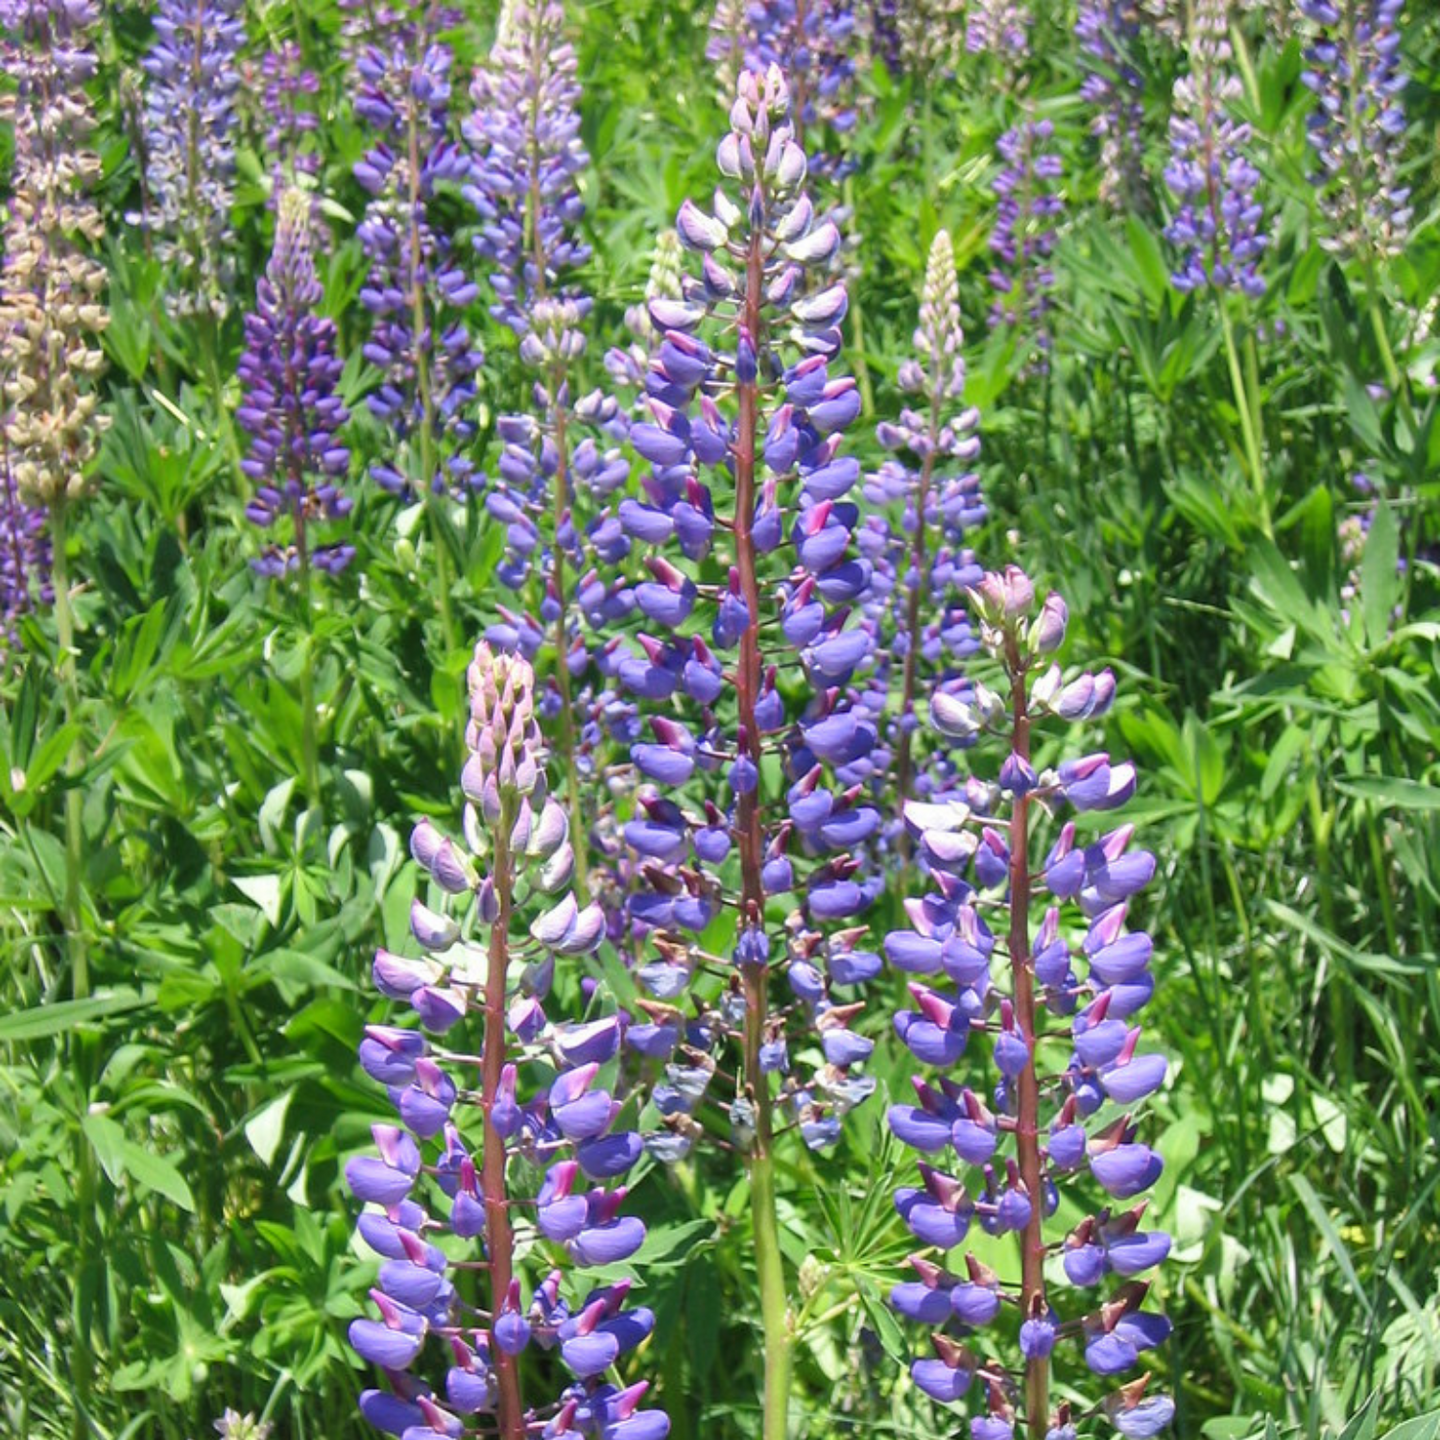 Several purple Large-leaved Lupine flowers (Lupinus polyphyllus). Another stunning Pacific Northwest native plant available at Sparrowhawk Native Plants Nursery in Portland, Oregon.